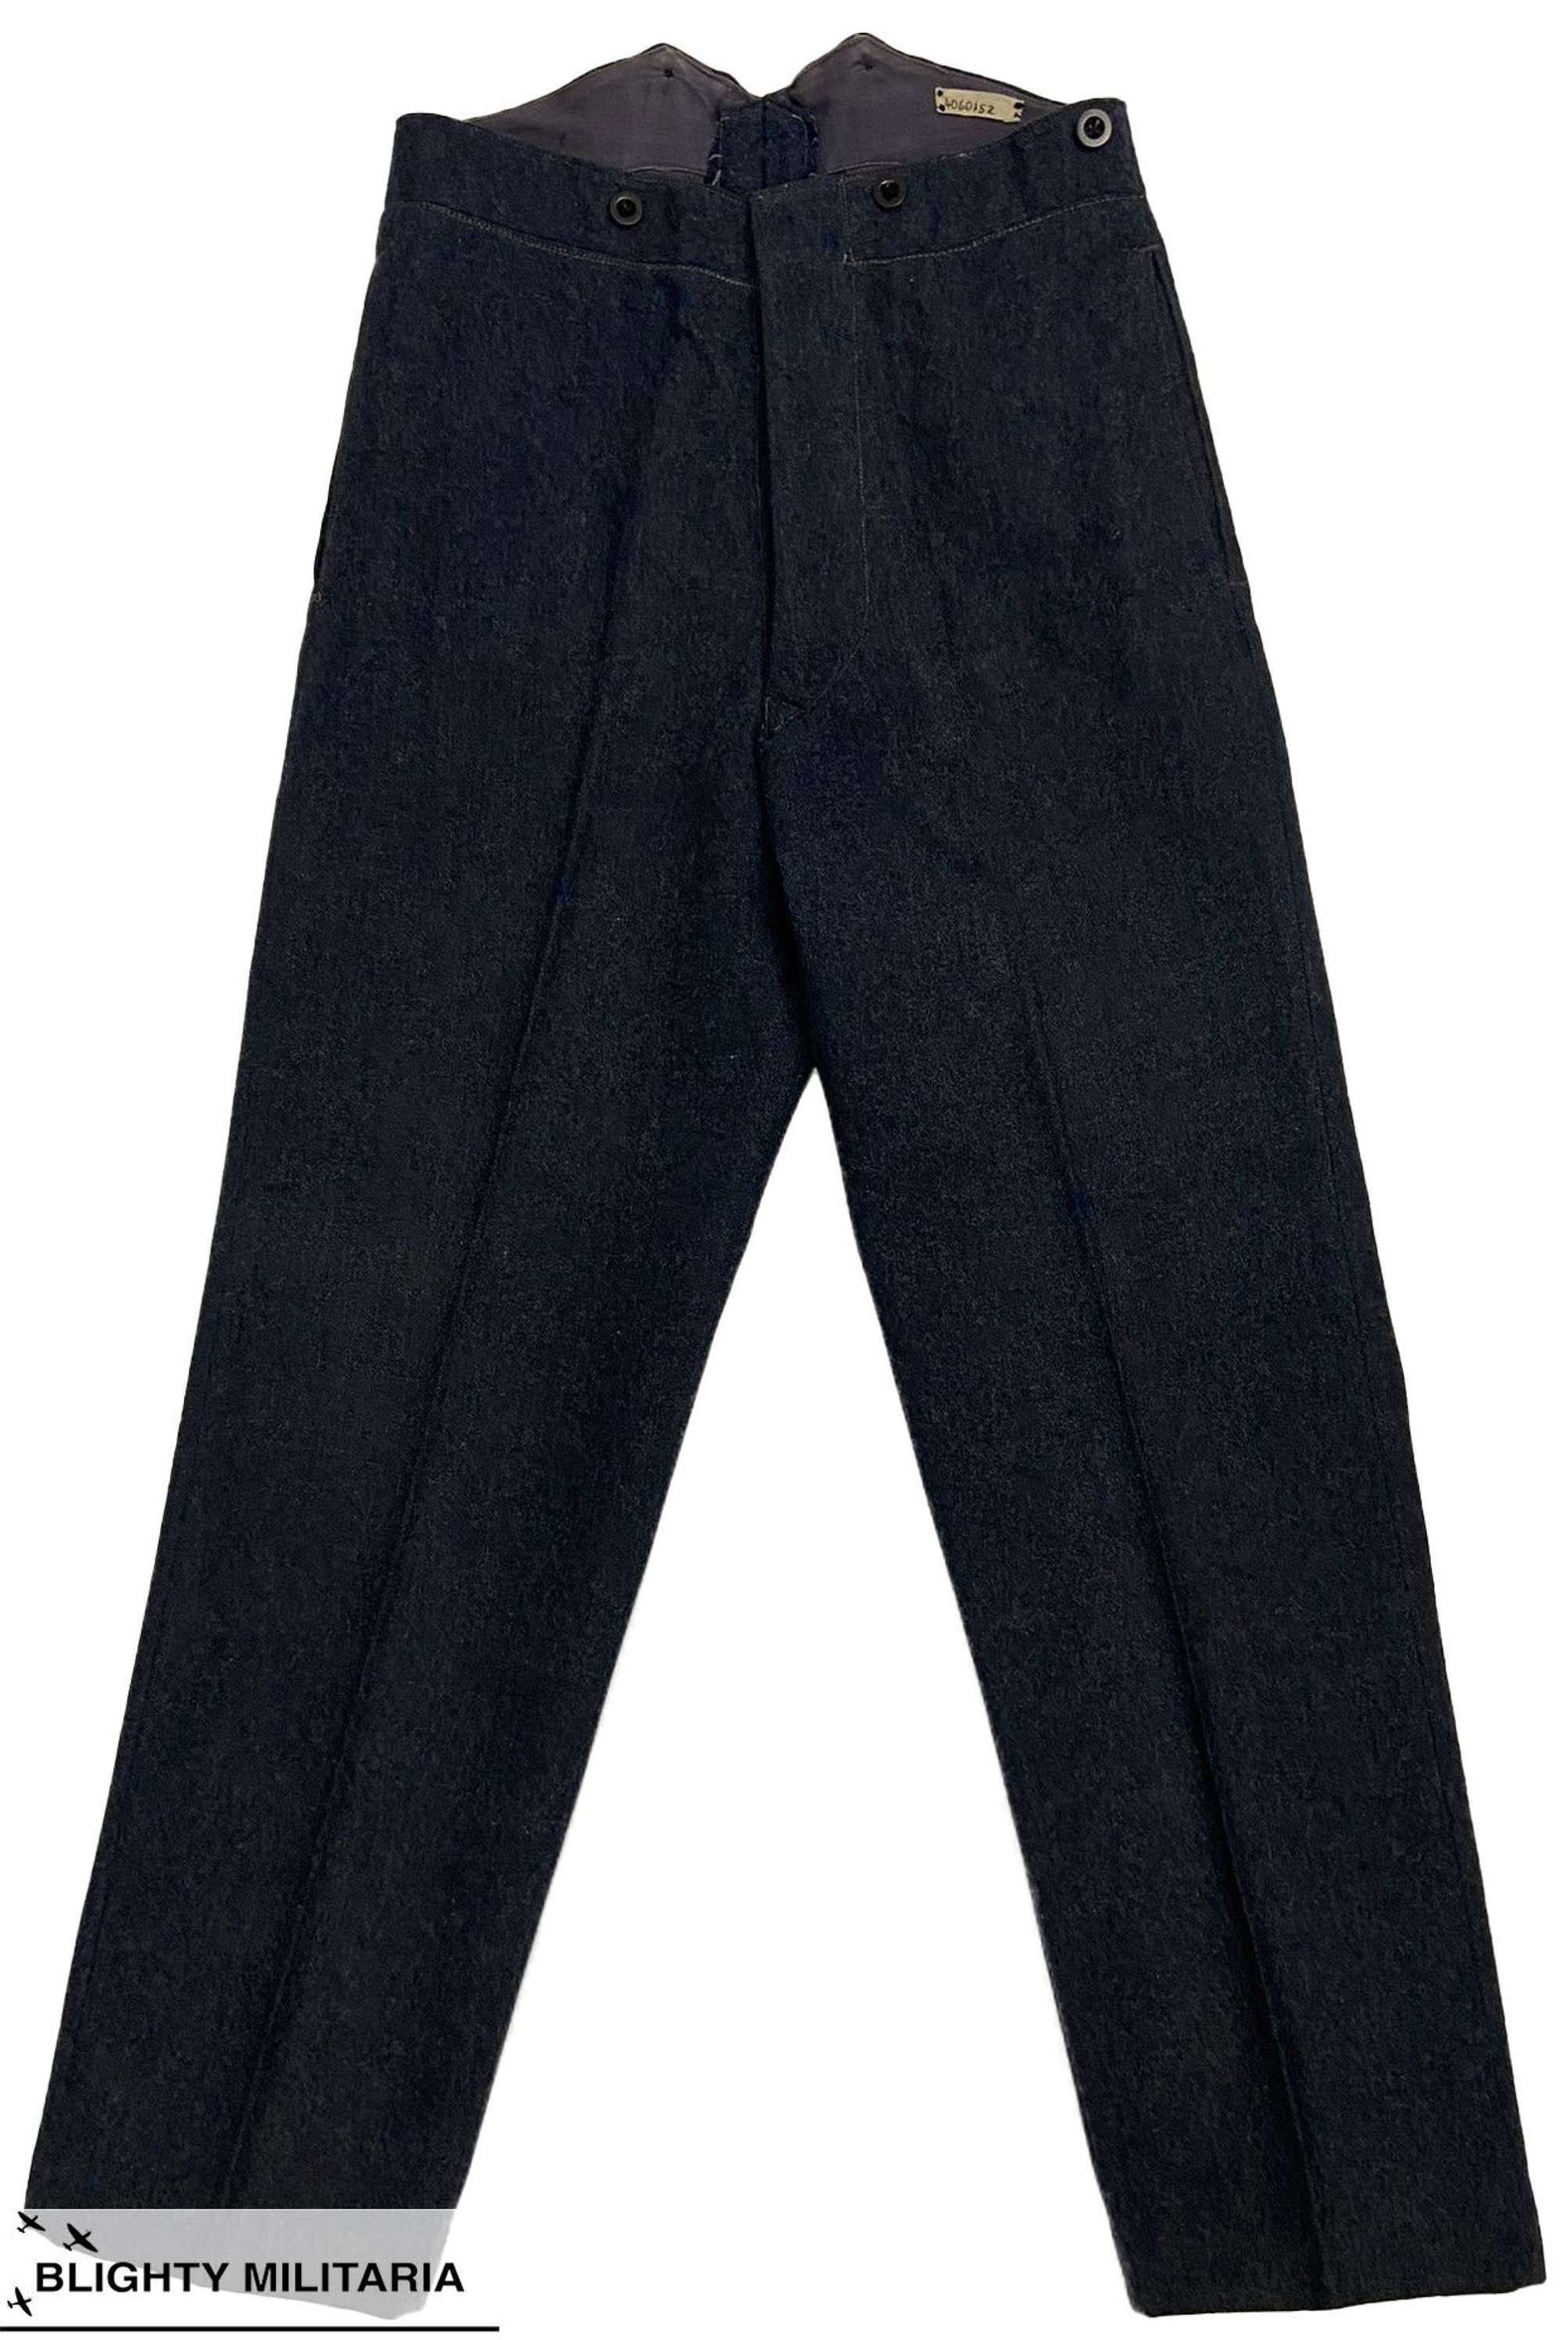 Original 1950 Dated RAF Ordinary Airman's Trousers - Size 11